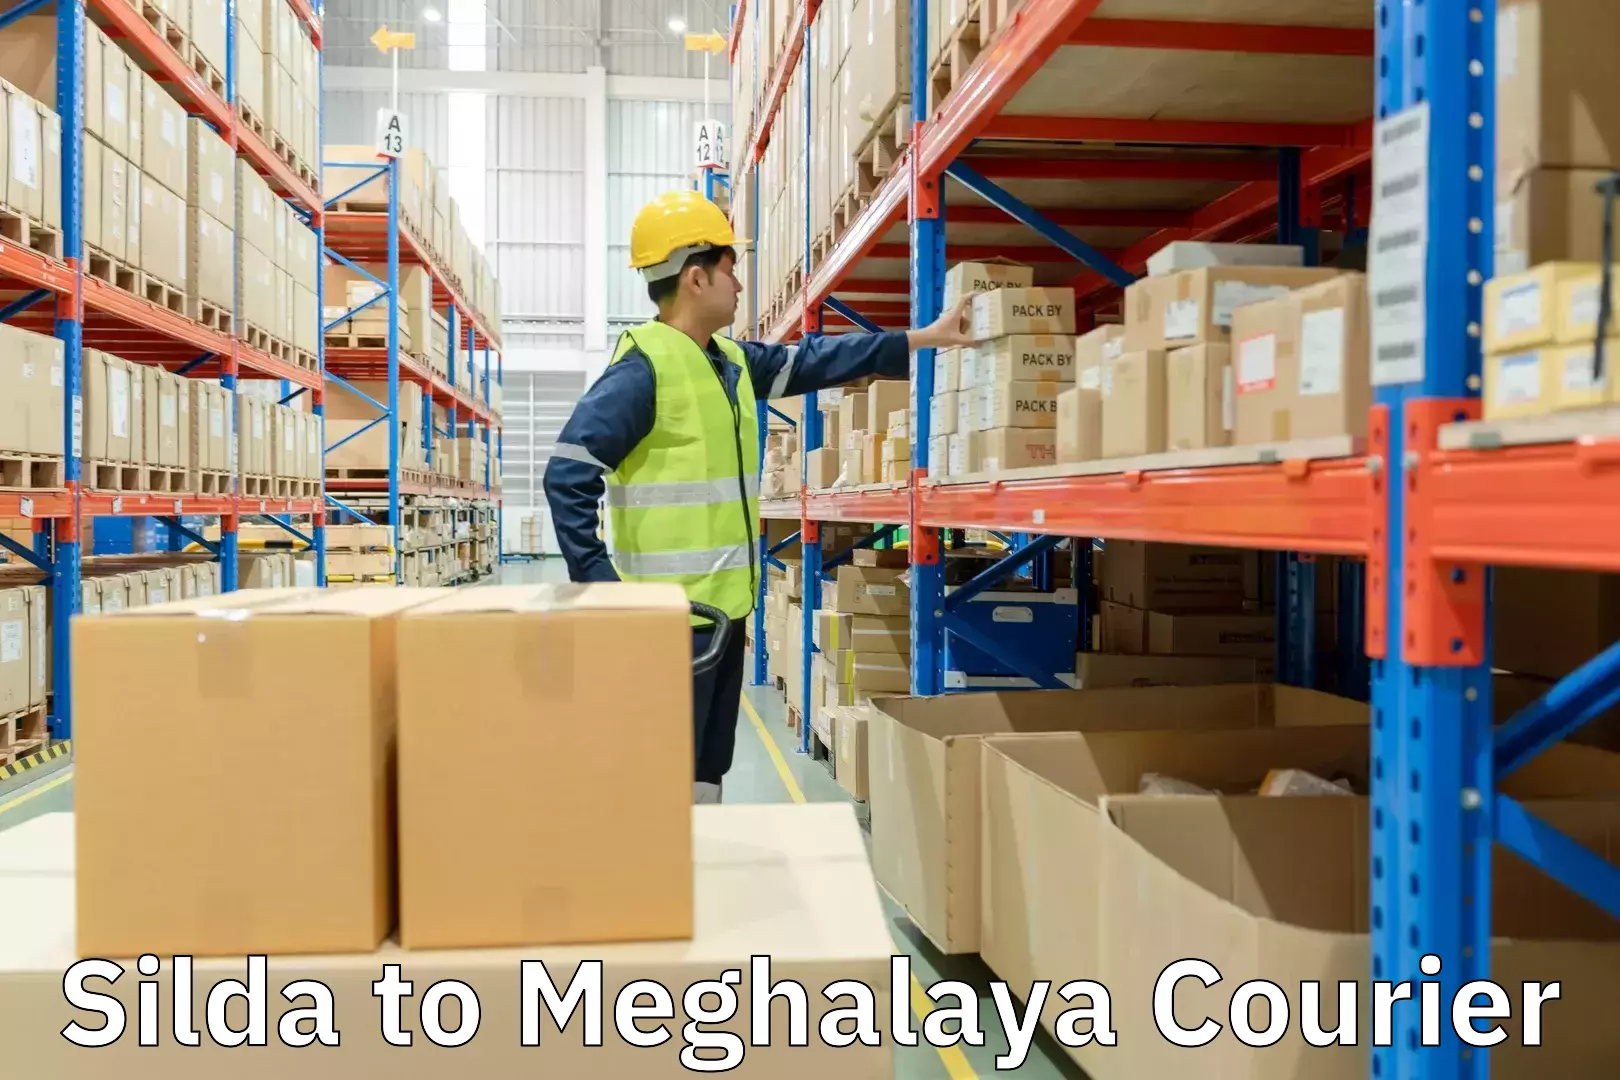 Flexible delivery schedules Silda to Meghalaya